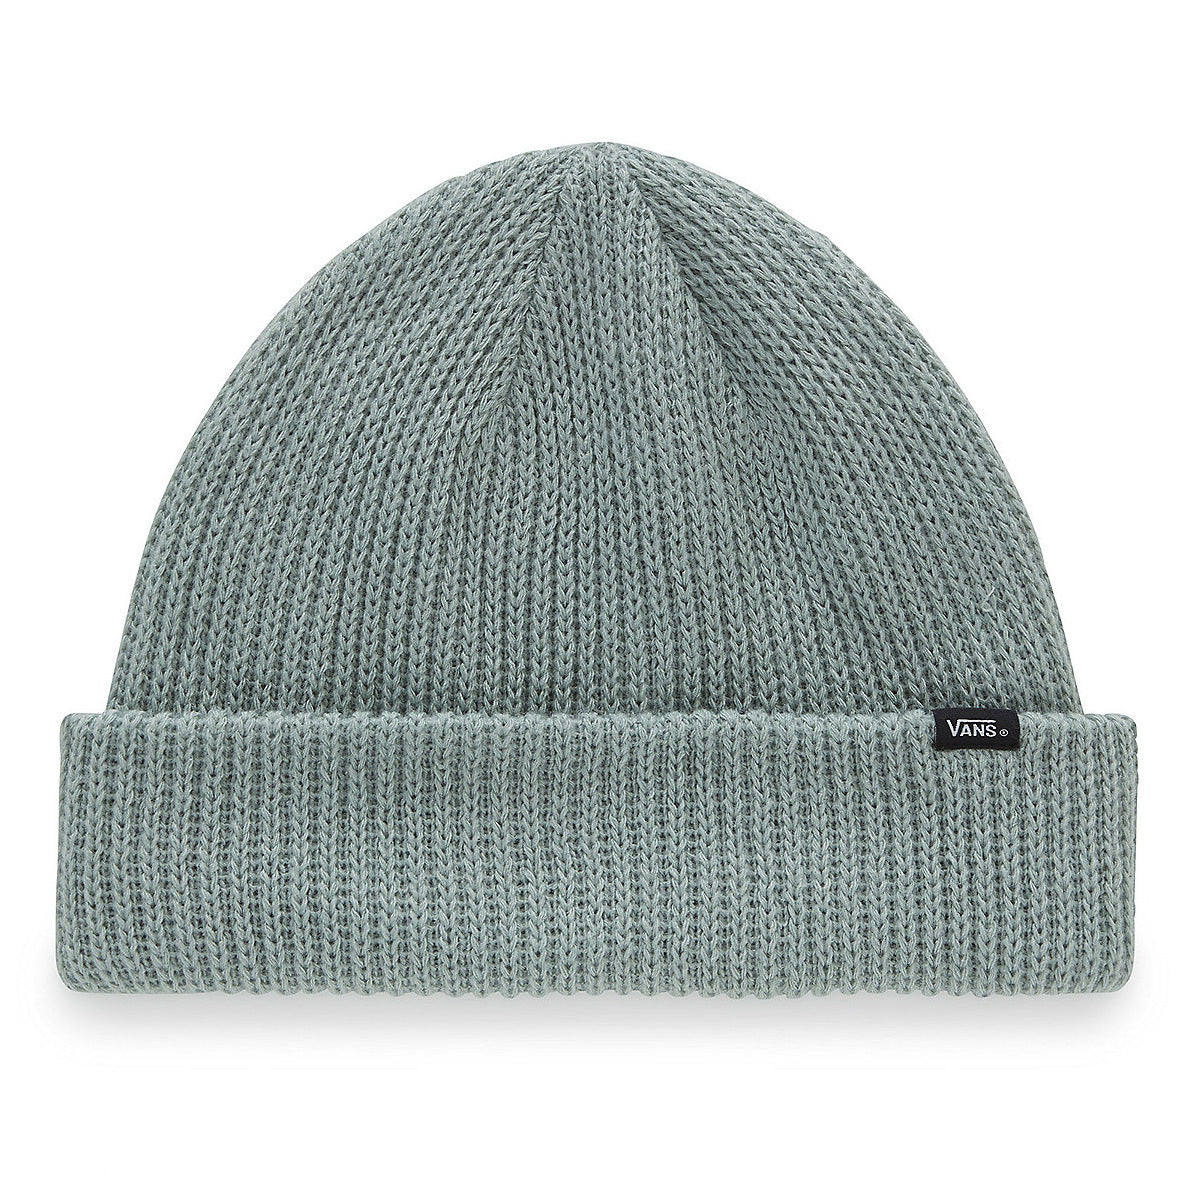 Iceberg green vans cuffed and ribbed beanie with vans logo tag. Free uk shipping over £50